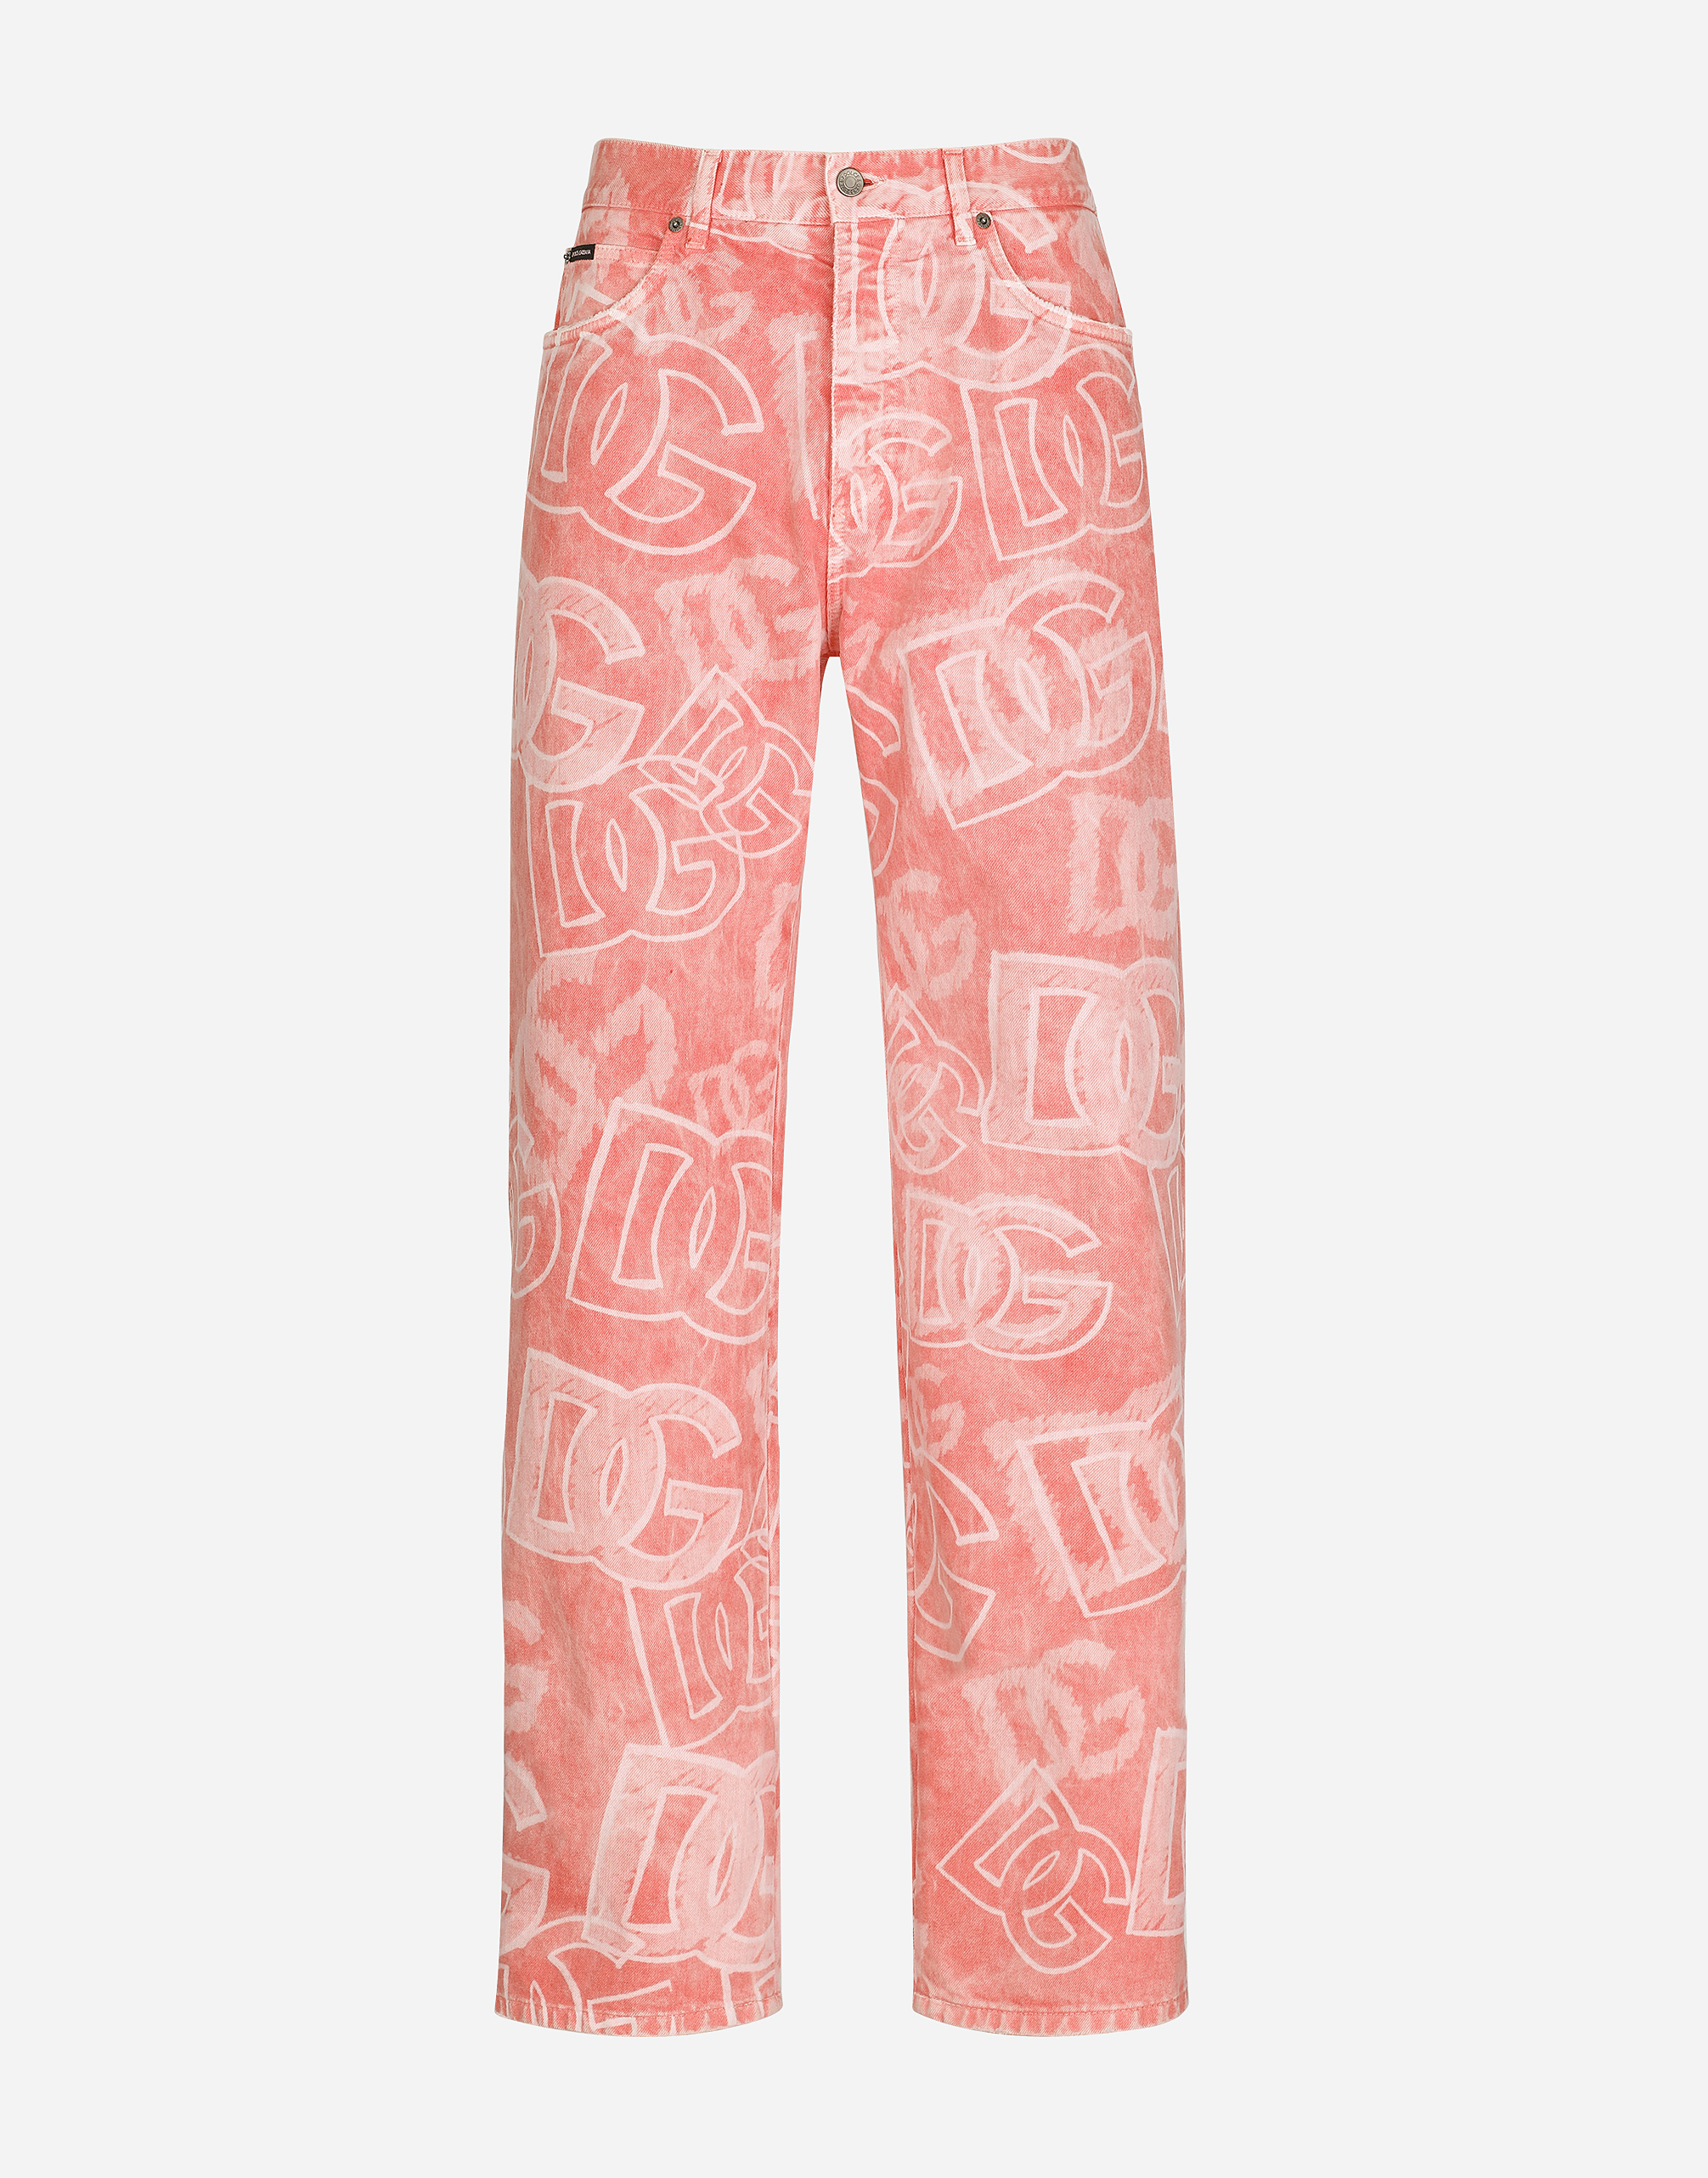 Oversize pink jeans with all-over DG print in Multicolor